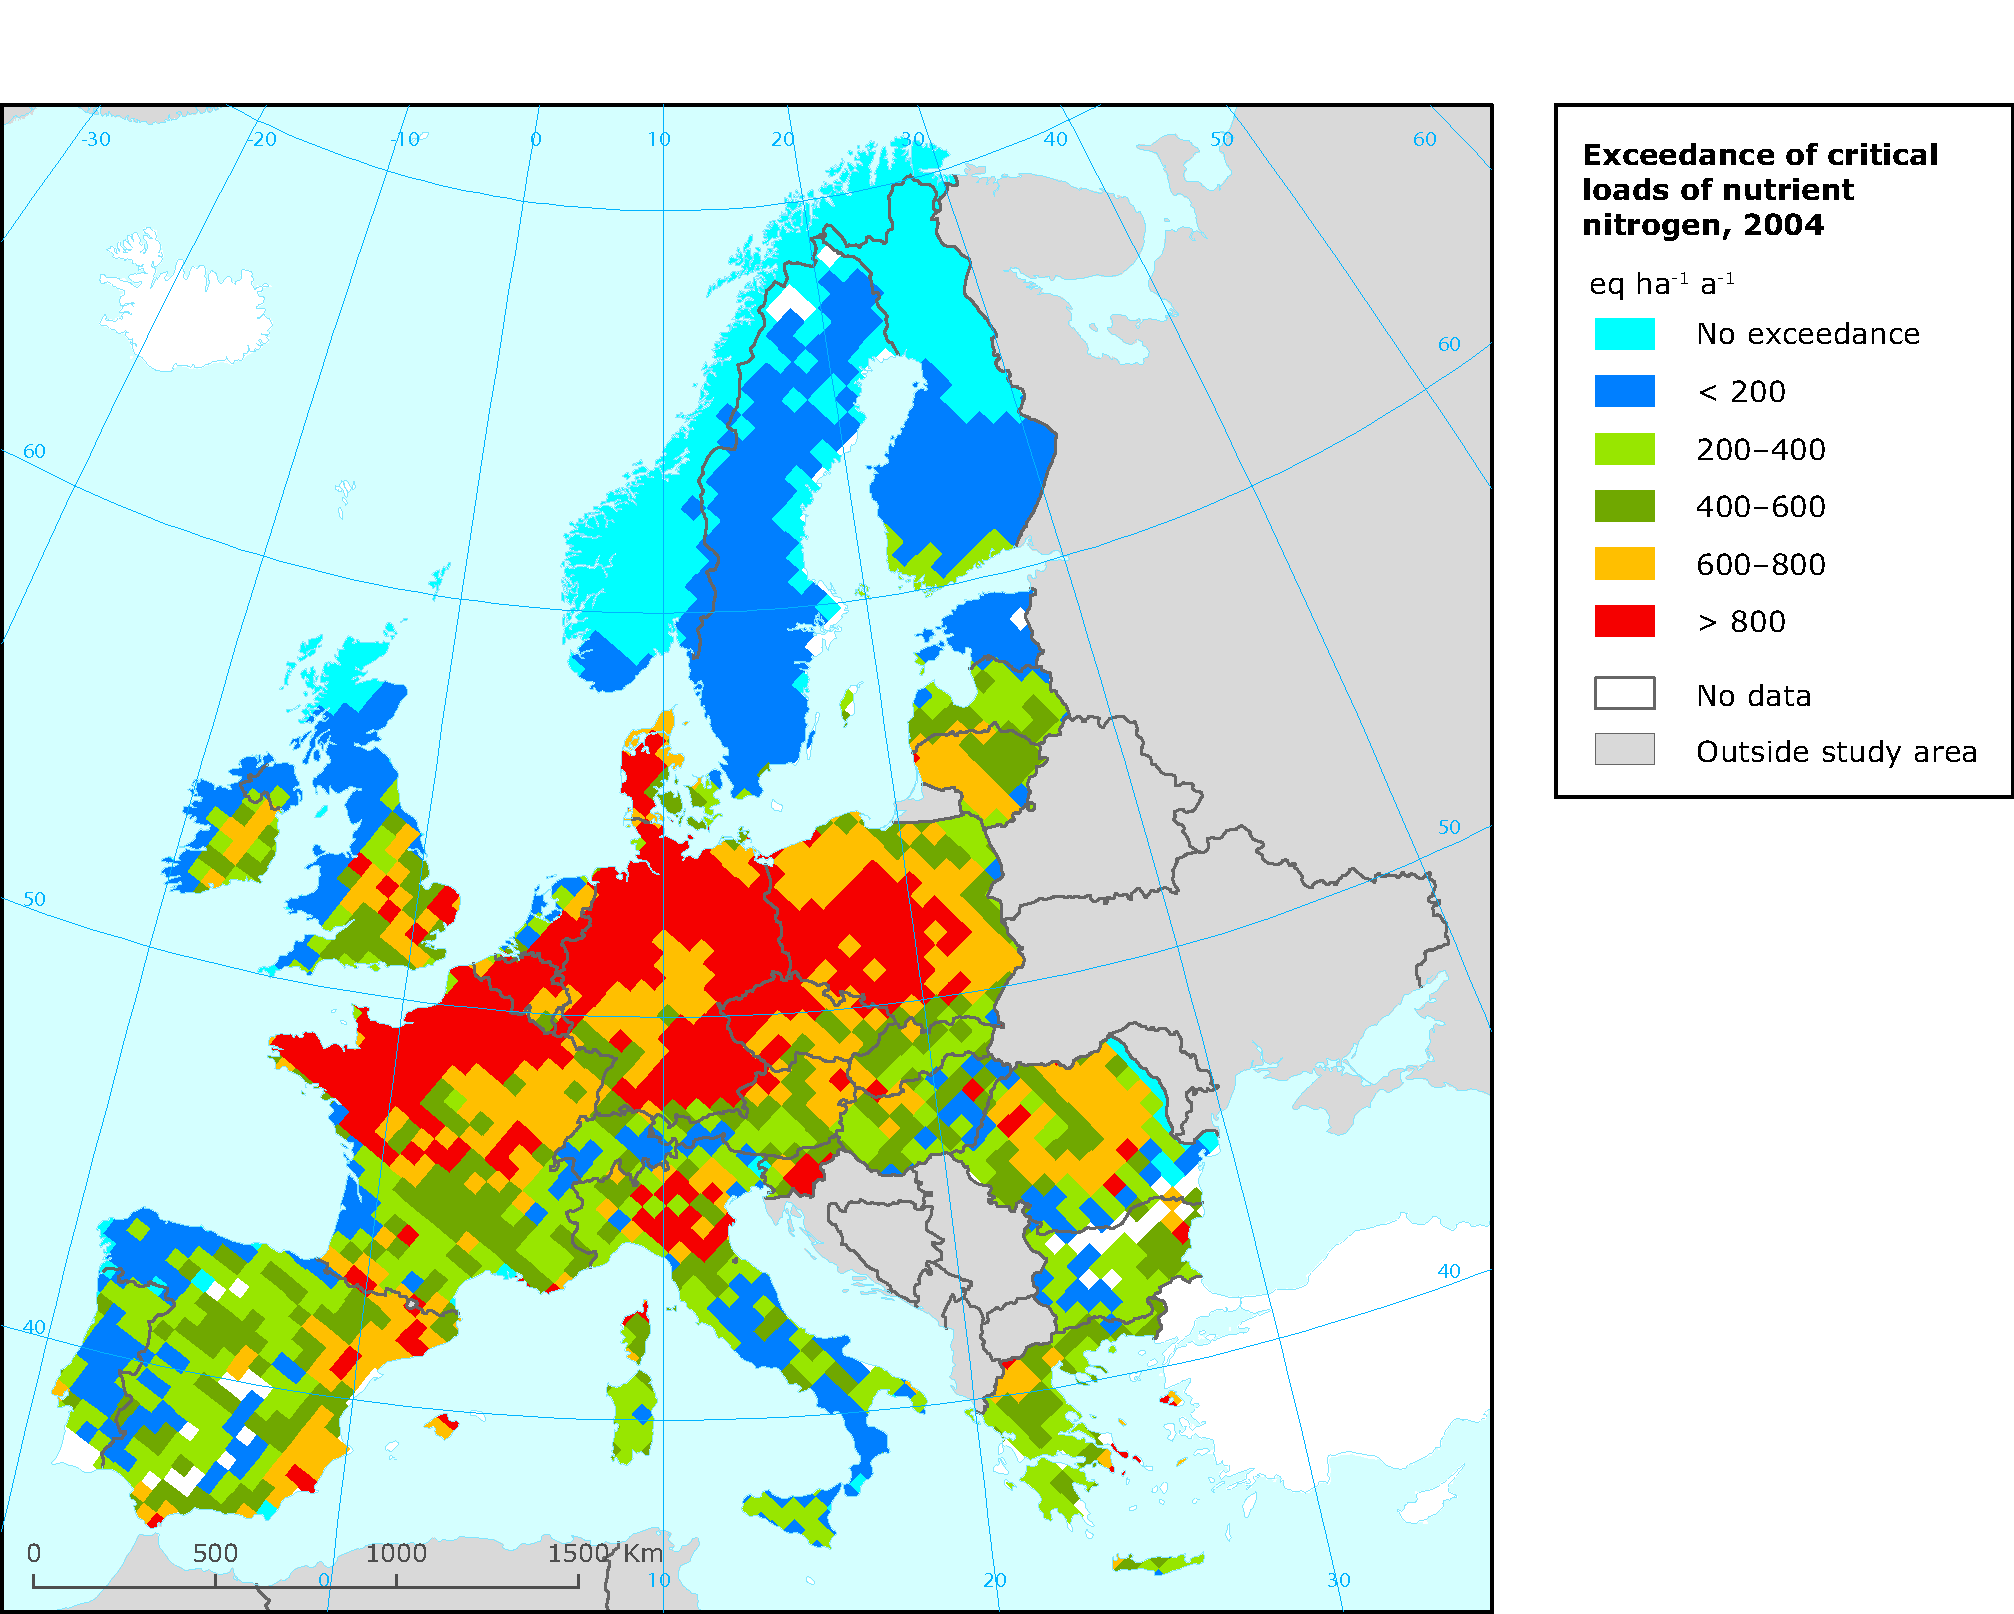 Exceedance of the critical loads for eutrophication in Europe (as average accumulated exceedances), 2004